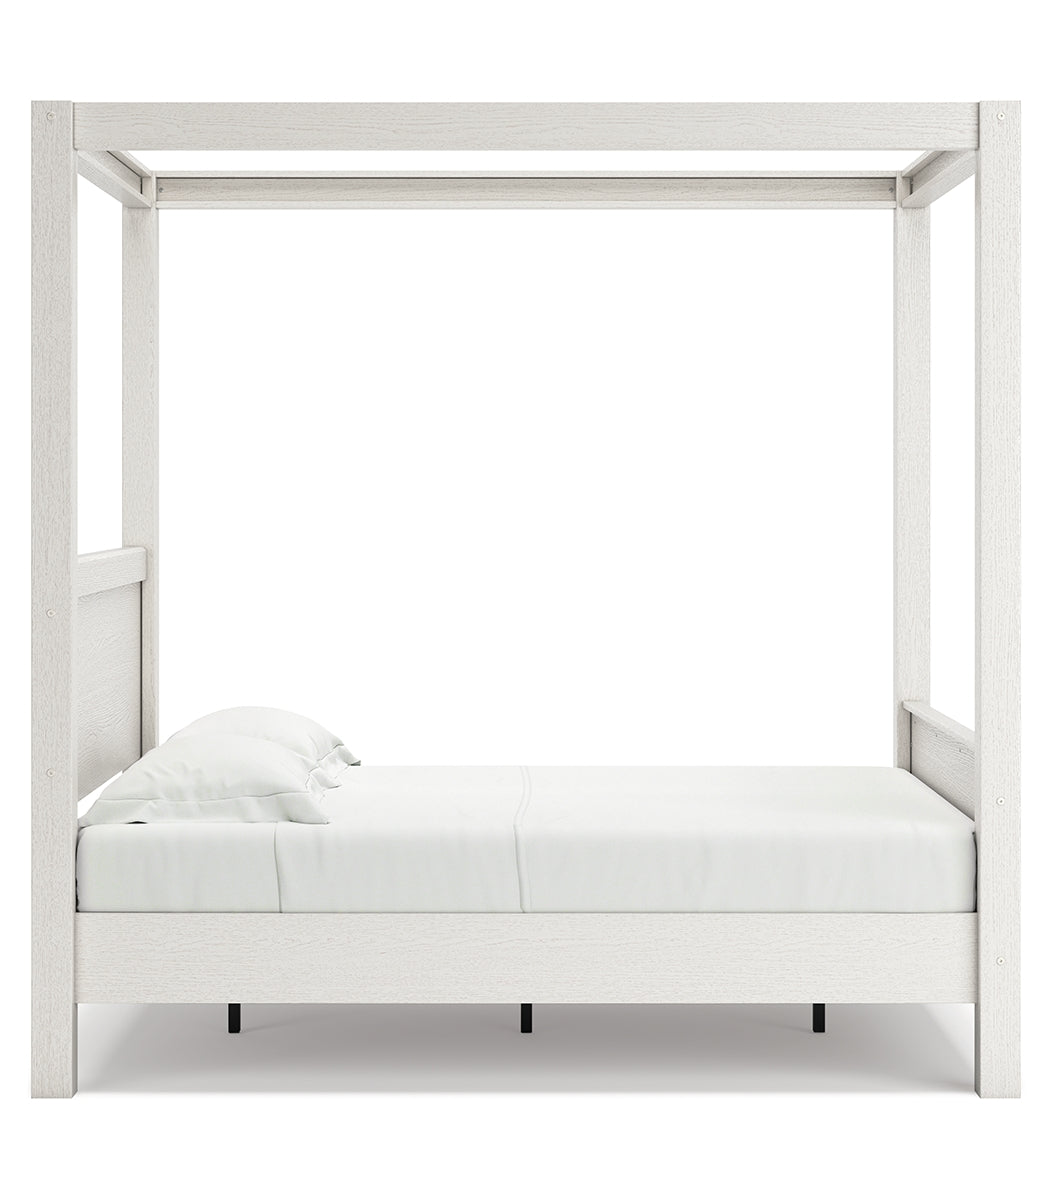 Aprilyn Full Canopy Bed with Dresser and 2 Nightstands